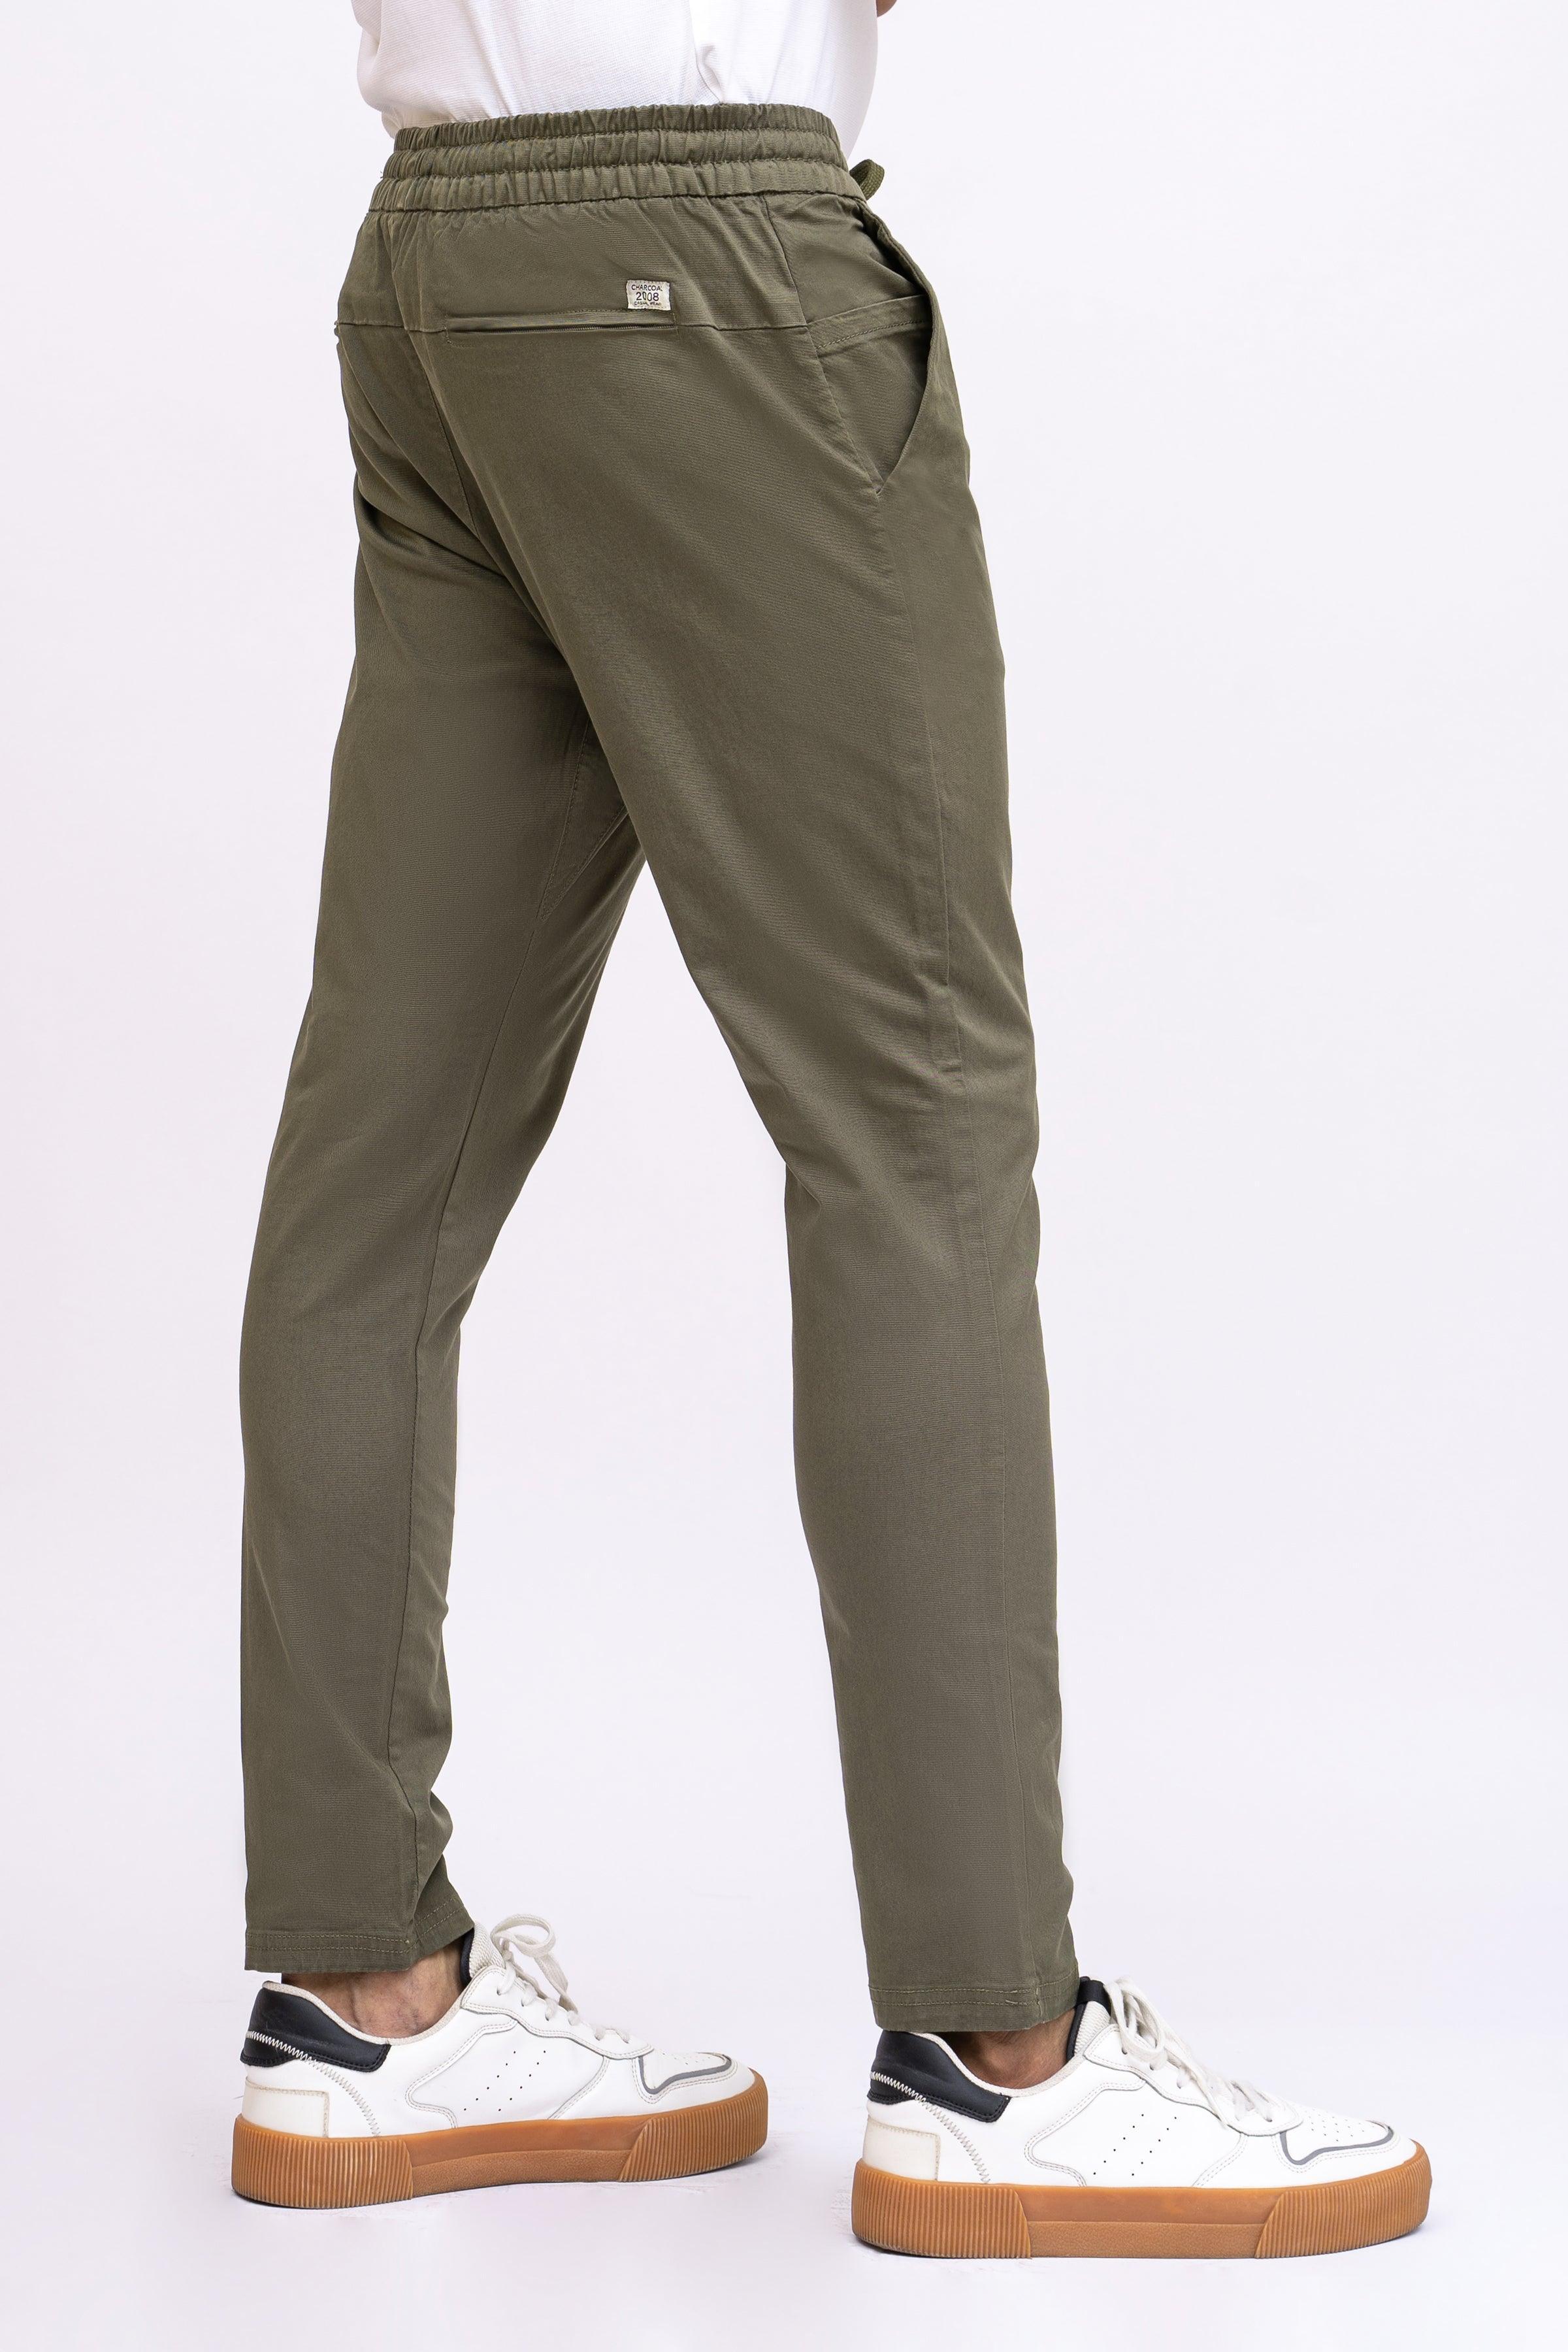 CASUAL JOGAR TROUSER OLIVE at Charcoal Clothing